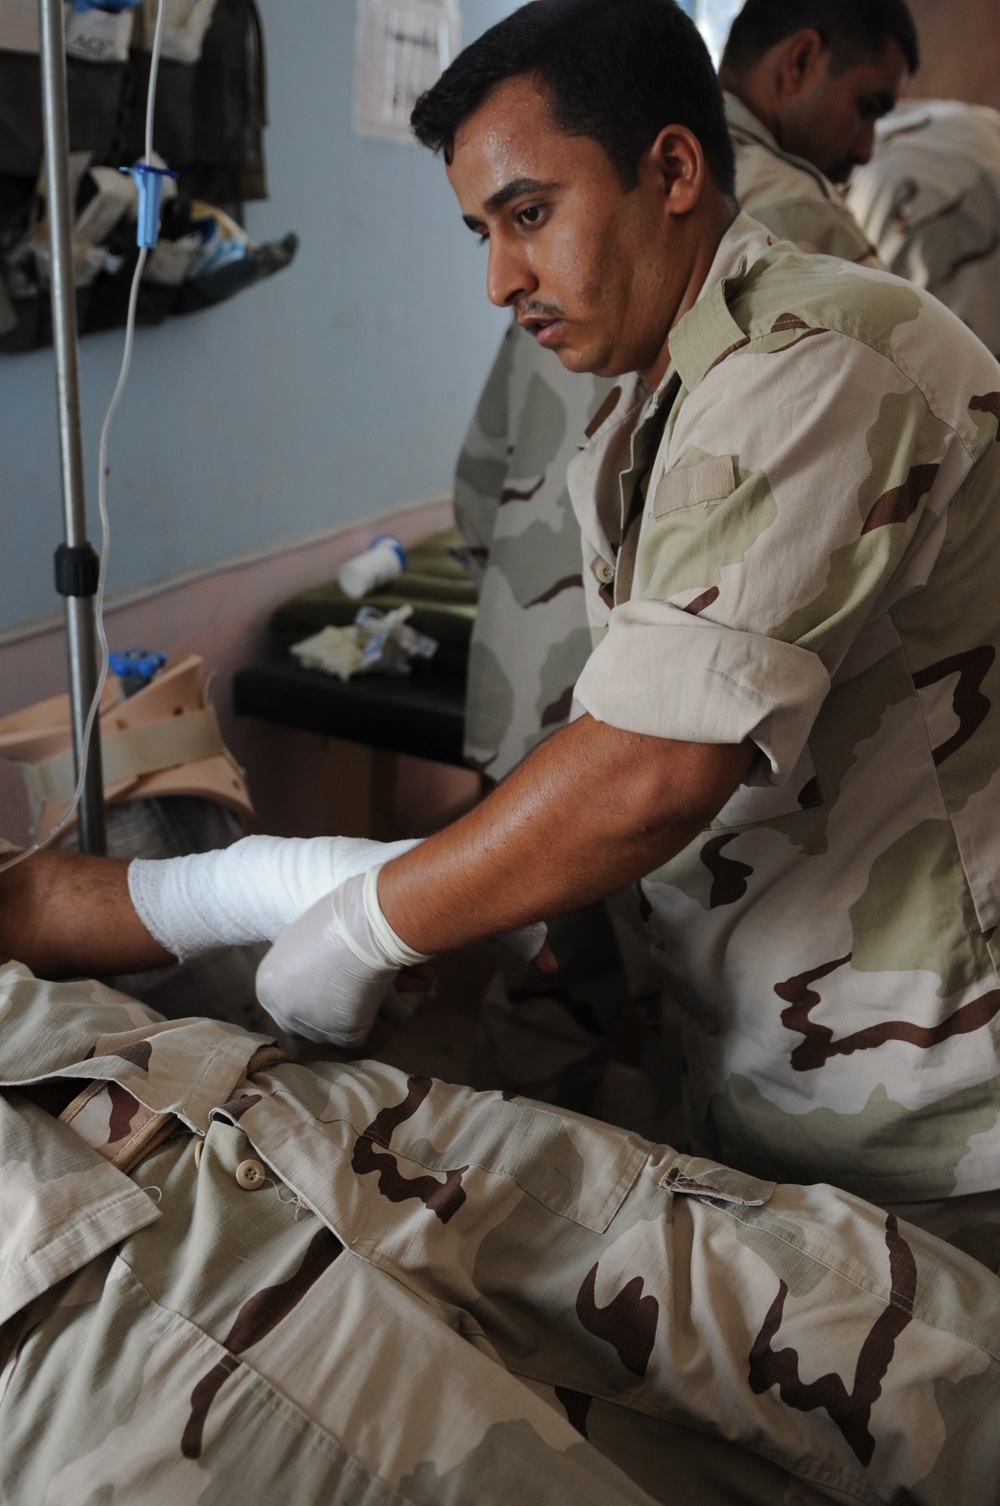 Joint Iraqi Medical Exercise